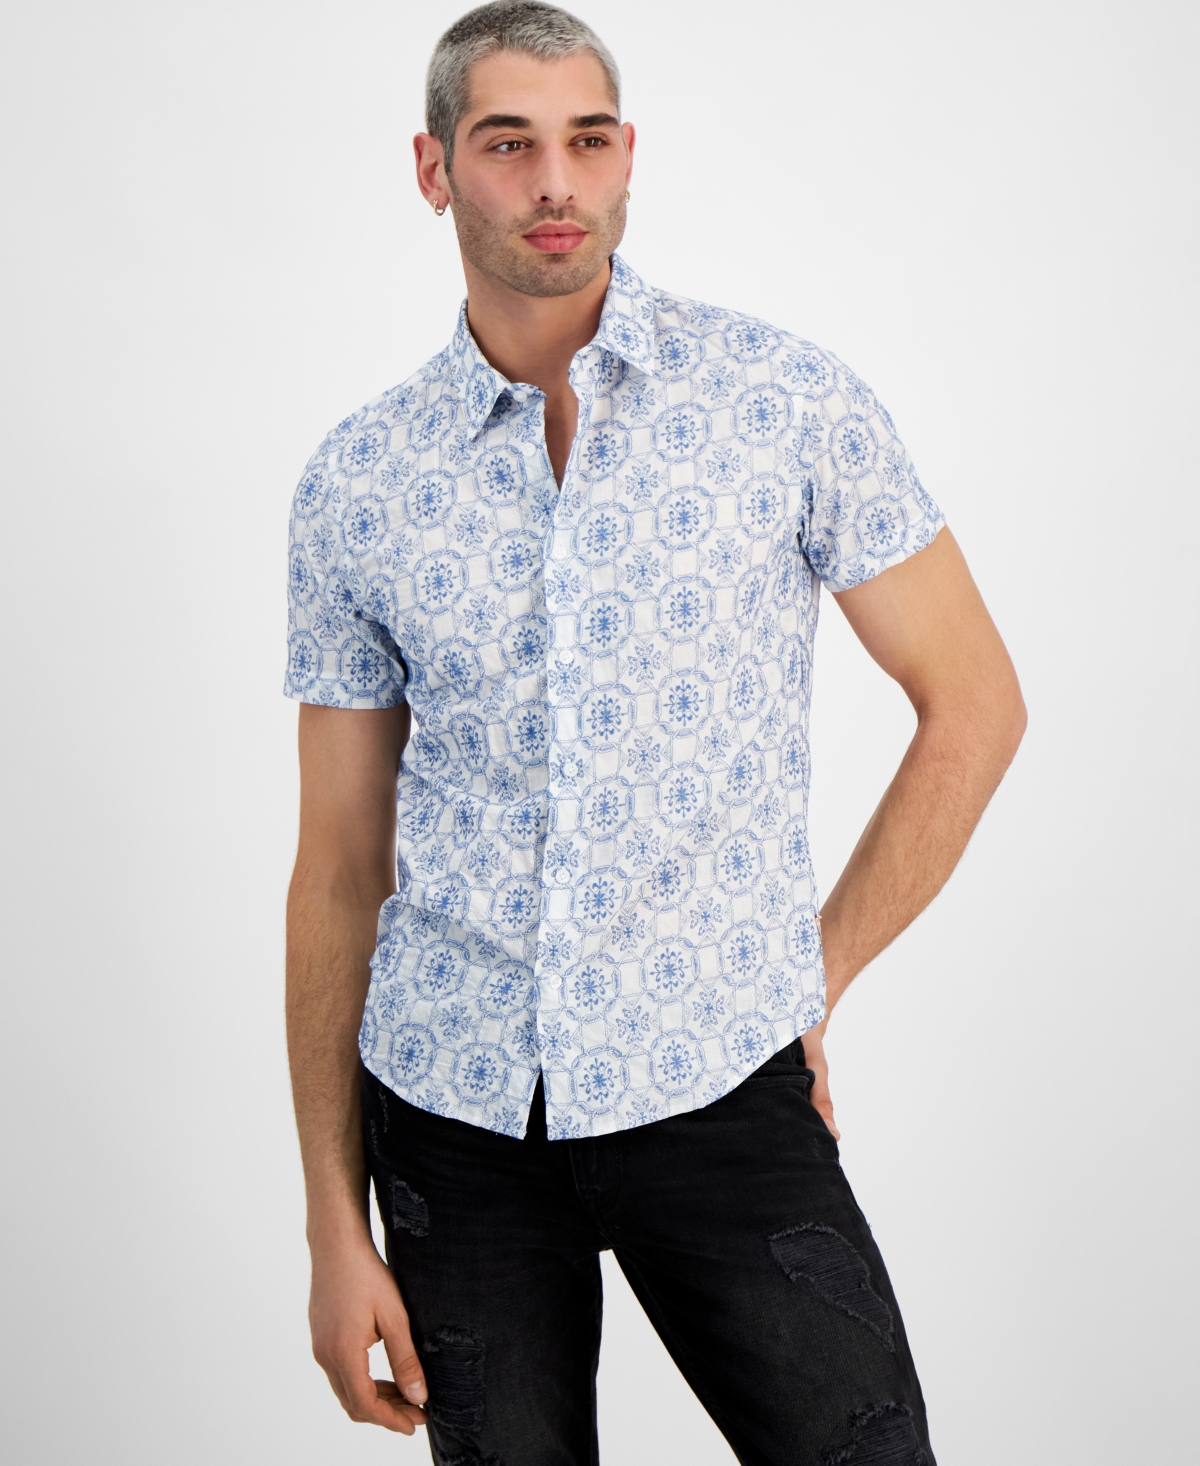 Men's Regular-Fit Mosaic Embroidery Shirt - PARTLY CLOUDY MULTI